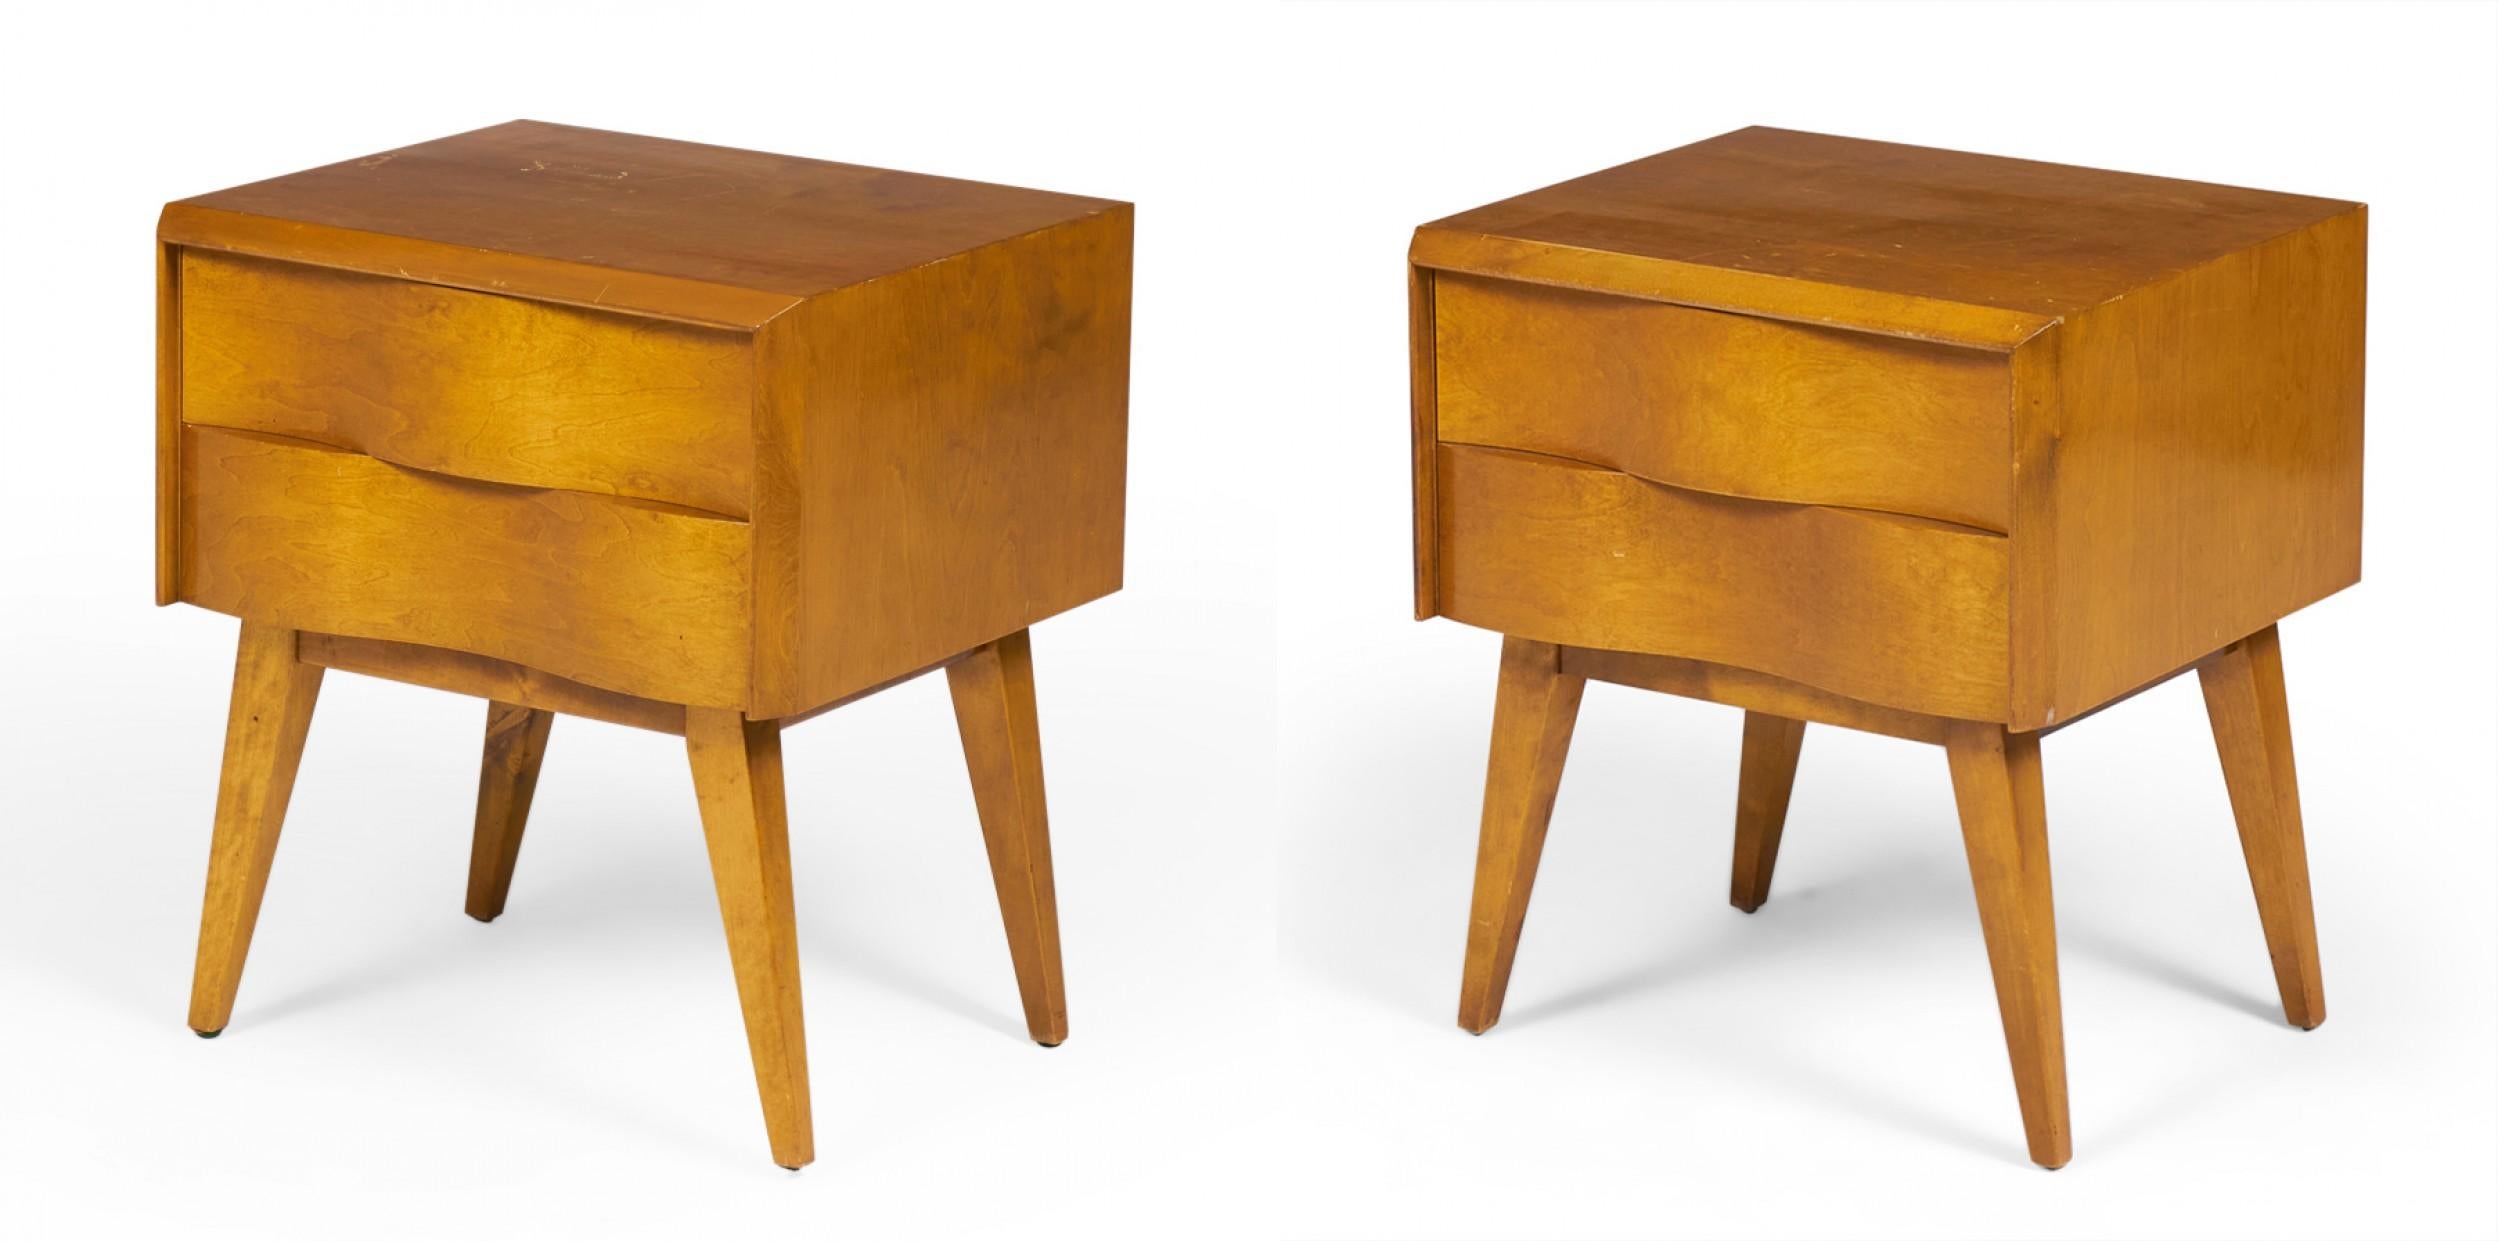 PAIR of Swedish Mid-Century (1940s) wave front birchwood nightstands with two drawers in a birchwood case resting on four tapered angled legs. (EDMOND SPENCE)(PRICED AS PAIR)(Matching chest of drawers: DUF0136)
